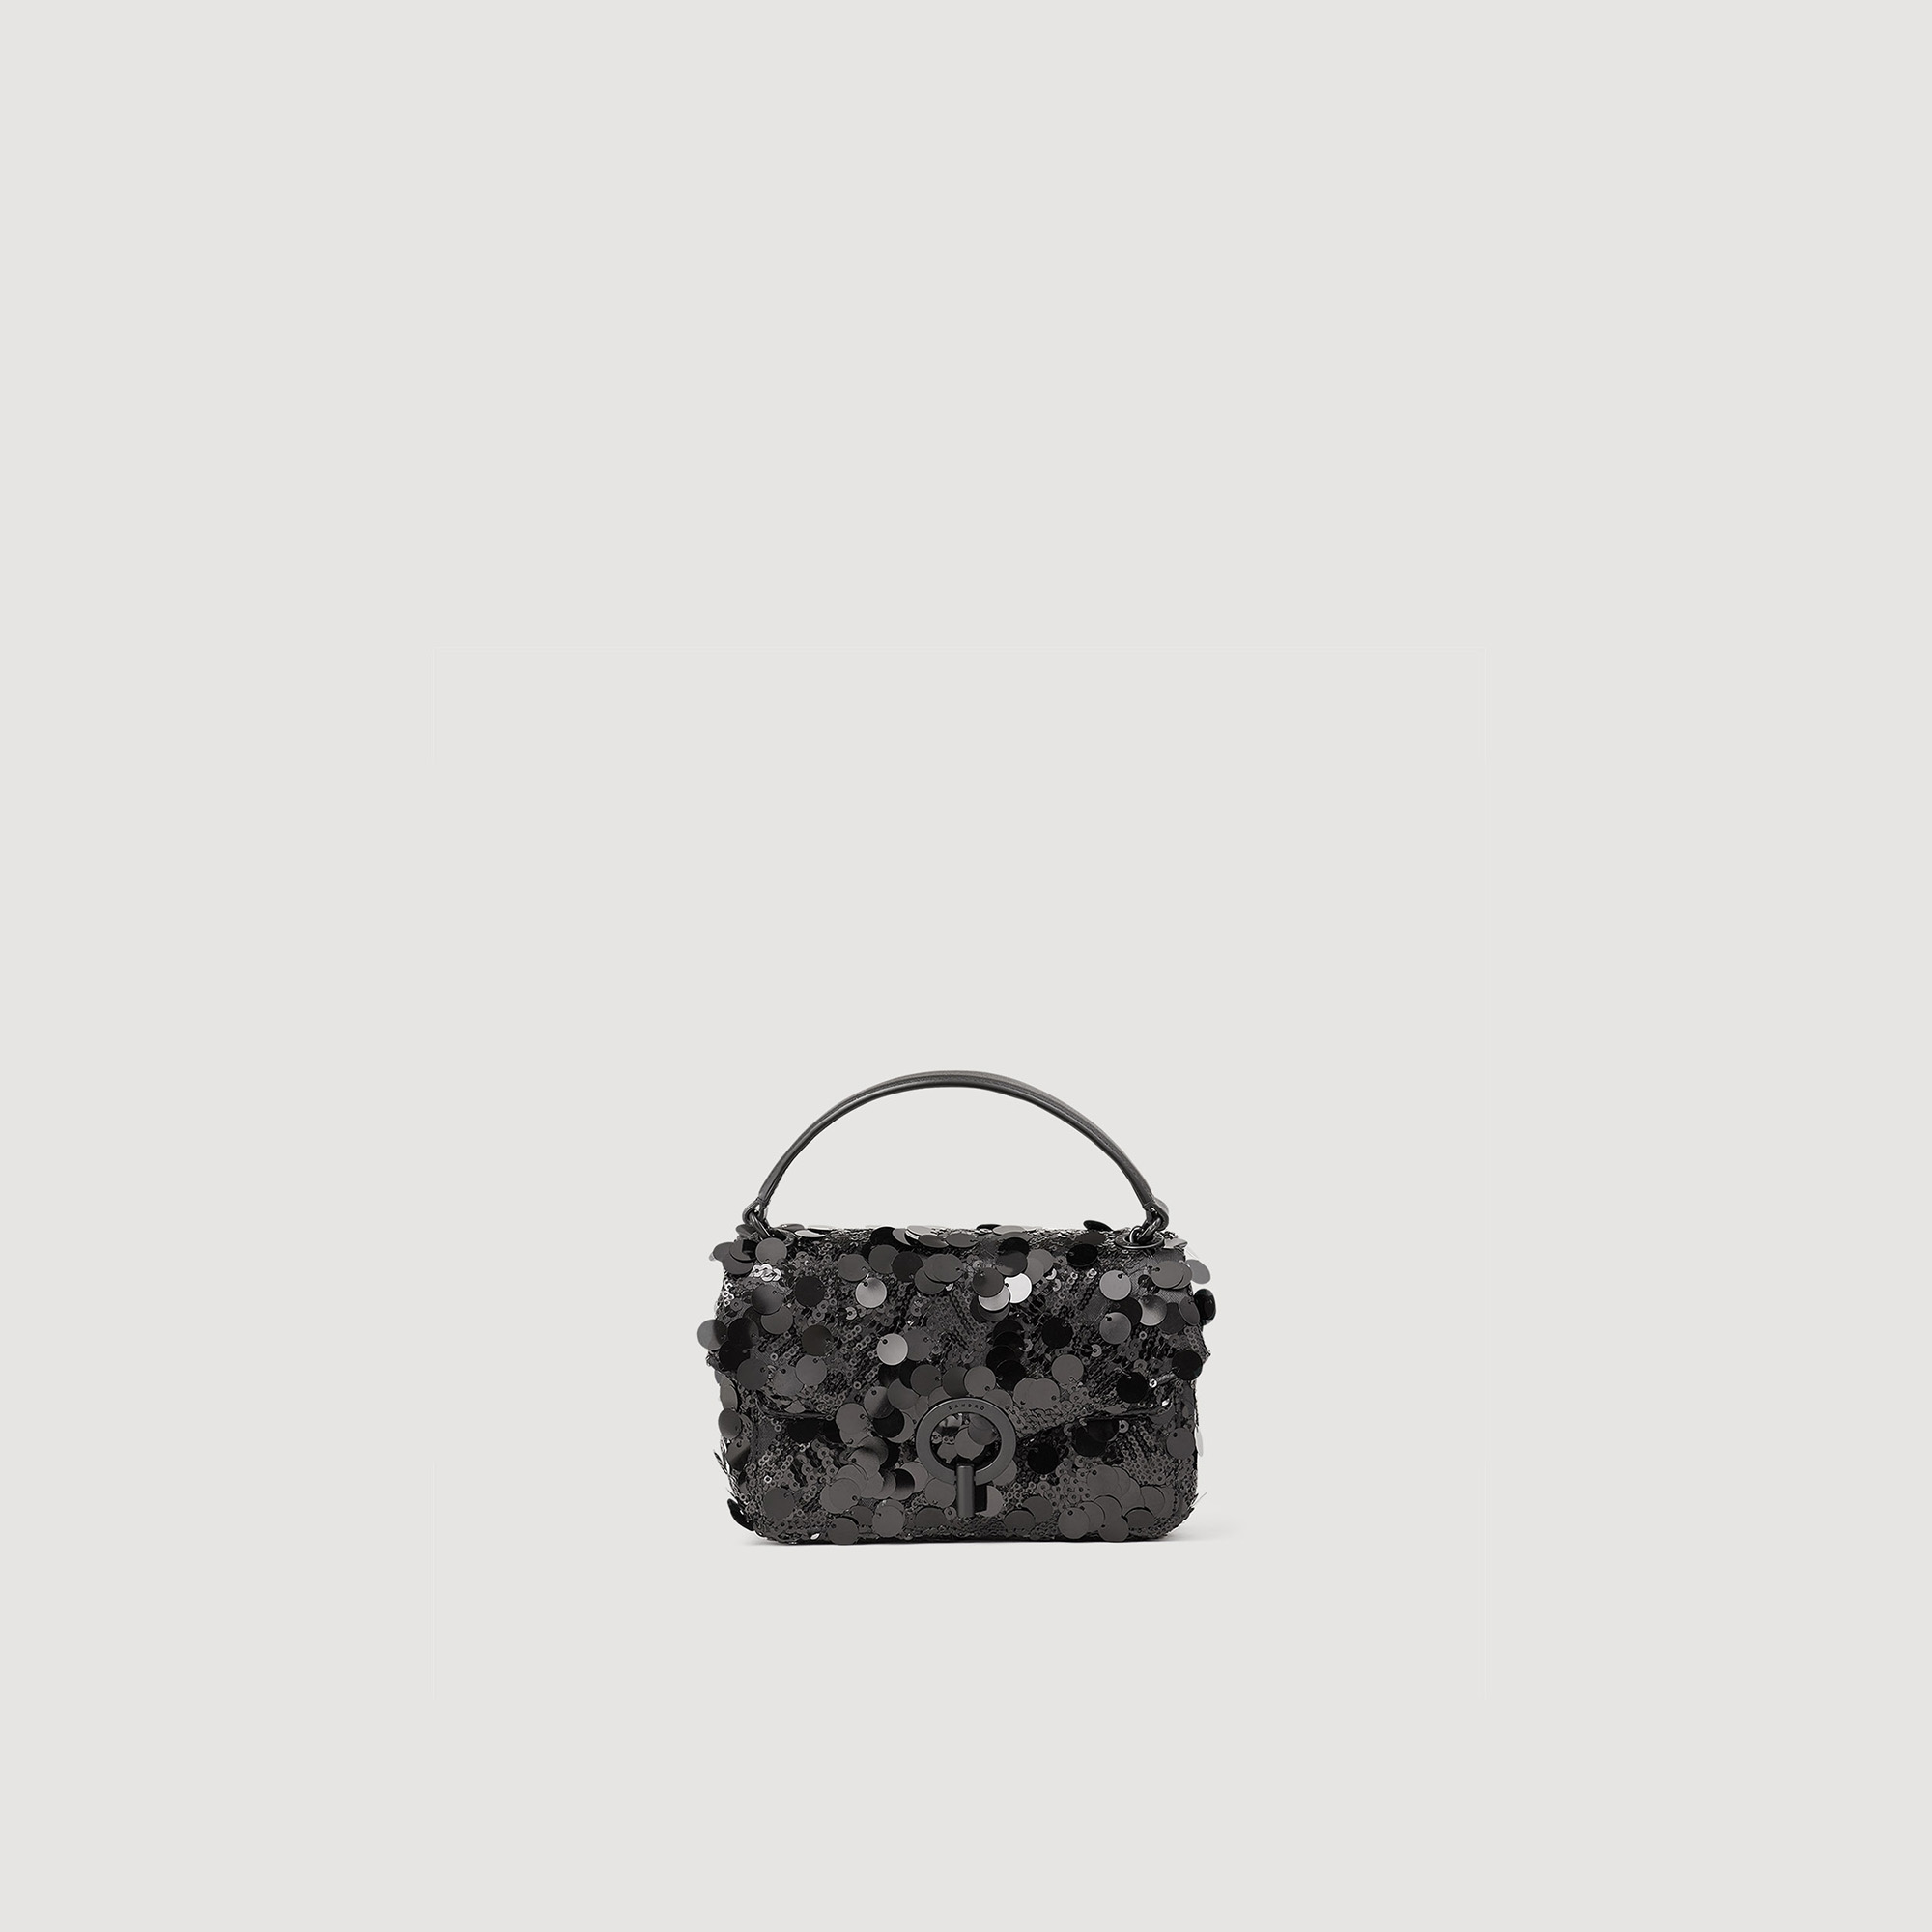 Sandro polyester Lining: The classic YZA bag now comes in a mini version embellished with maximum sequins